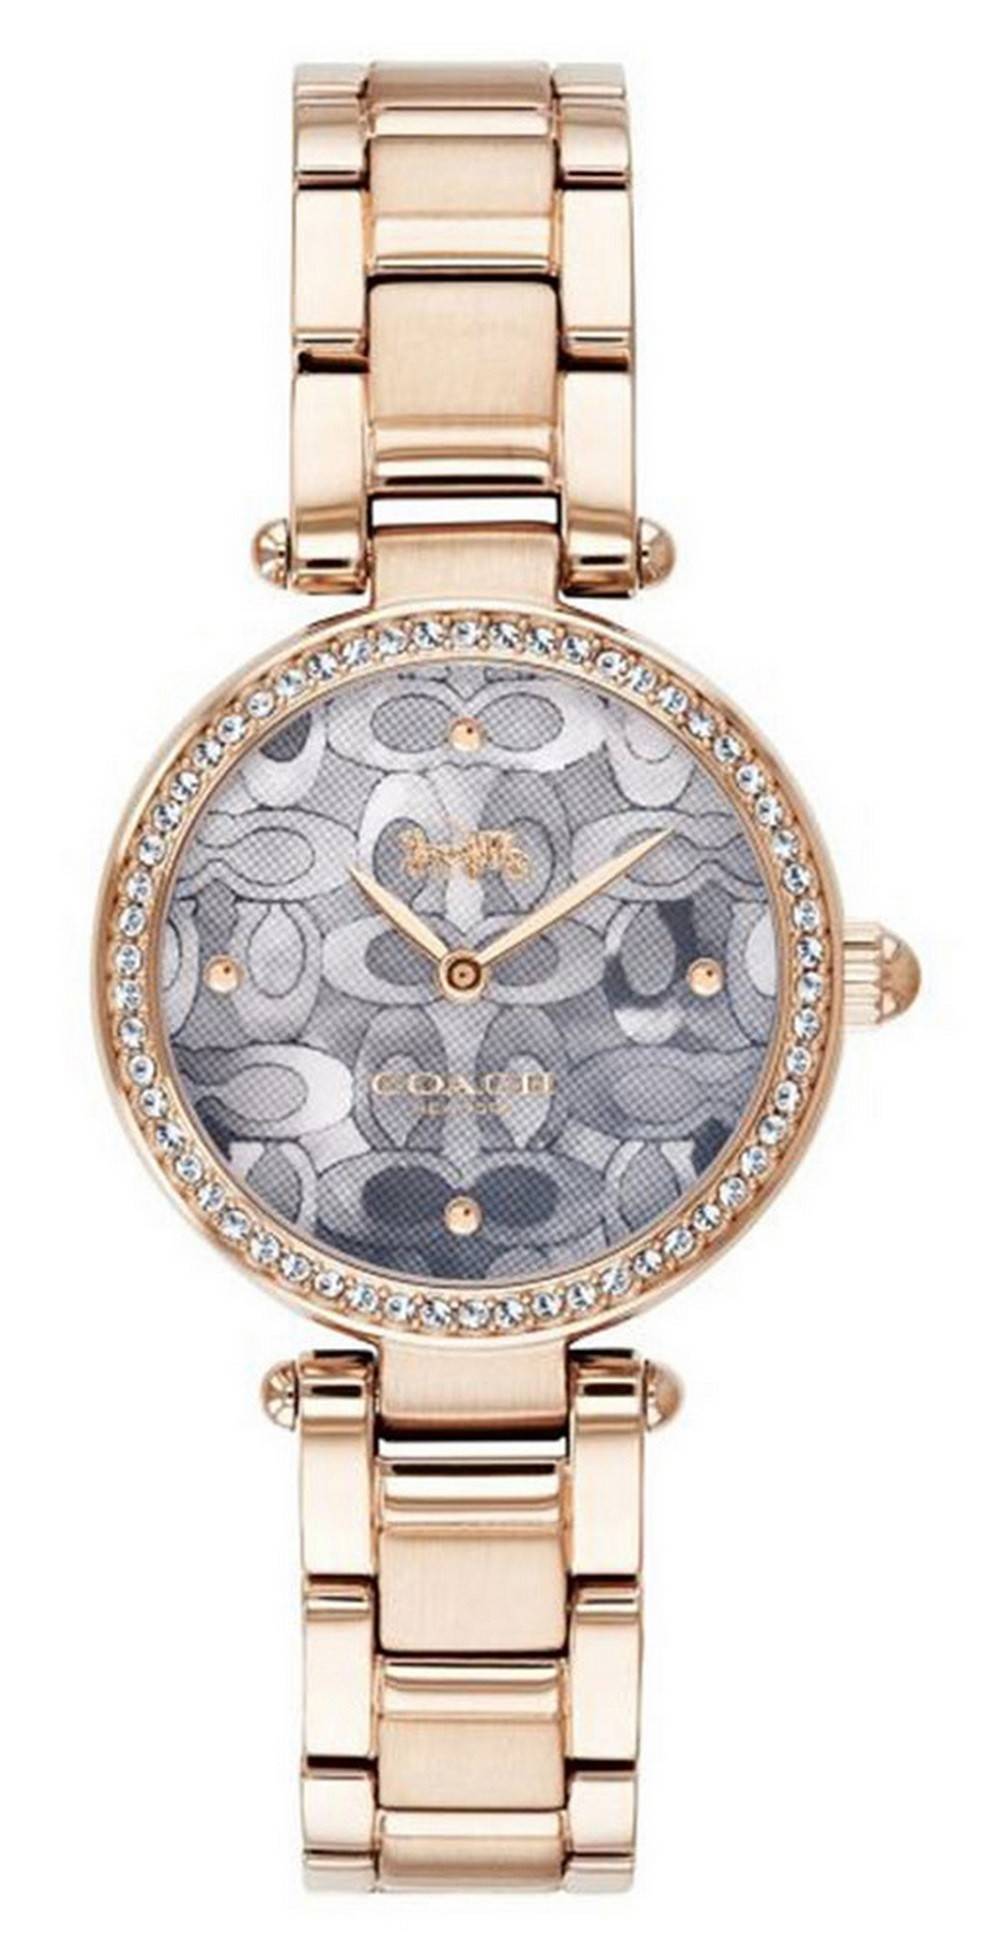 Coach Park Crystal Accents Rose Gold Tone Stainless Steel Quartz 14503226 Womens Watch